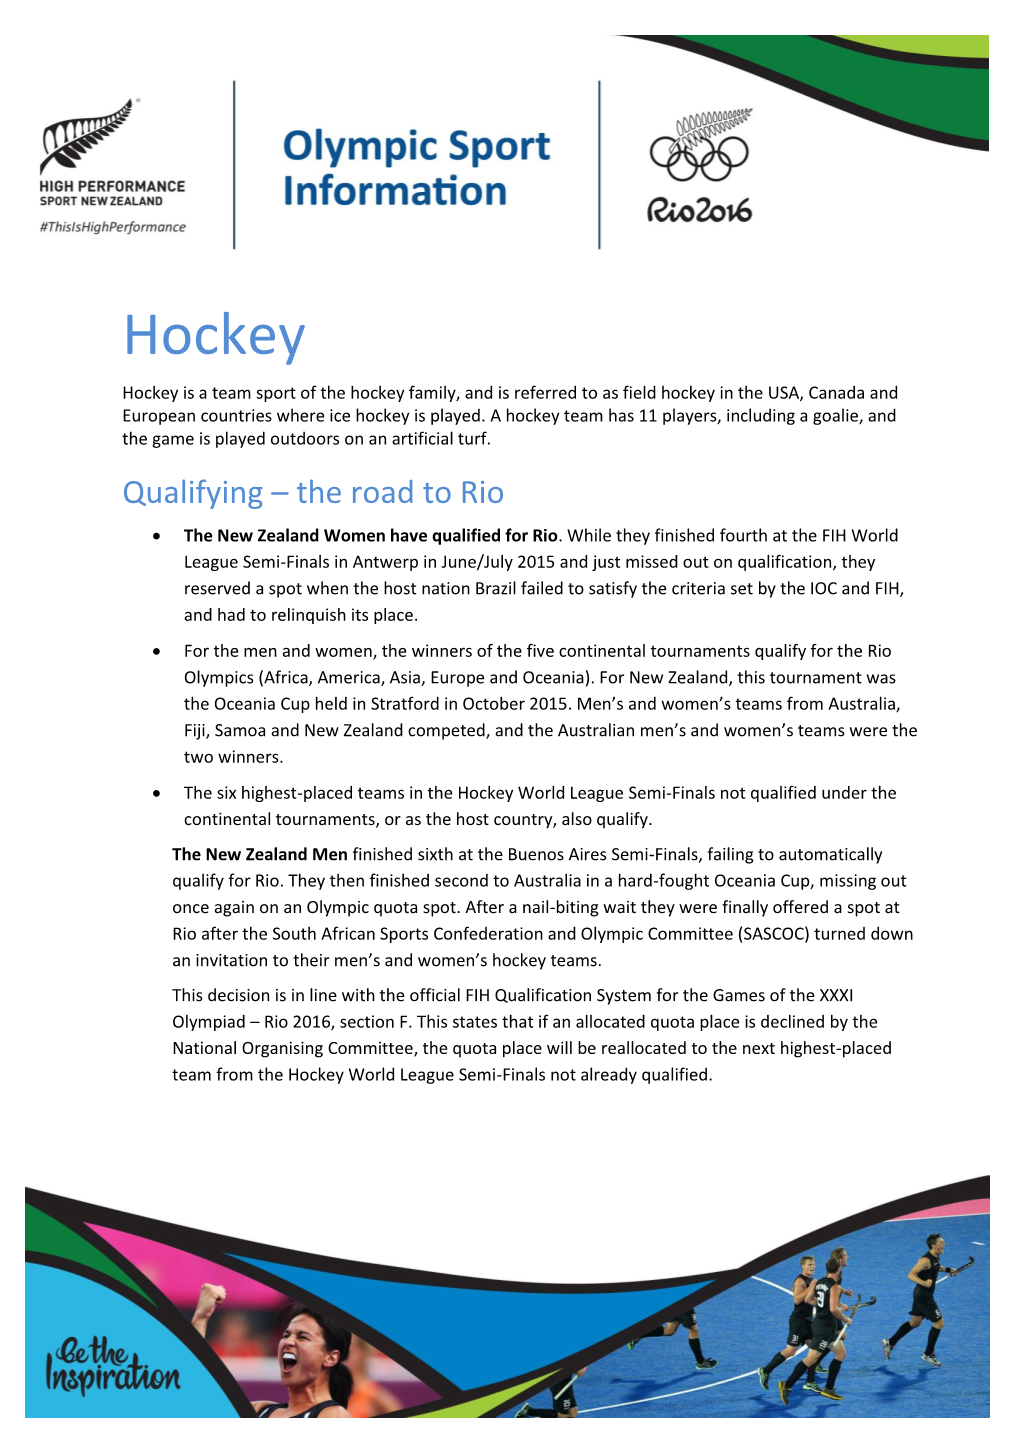 Hockey Hockey Is a Team Sport of the Hockey Family, and Is Referred to As Field Hockey in the USA, Canada and European Countries Where Ice Hockey Is Played